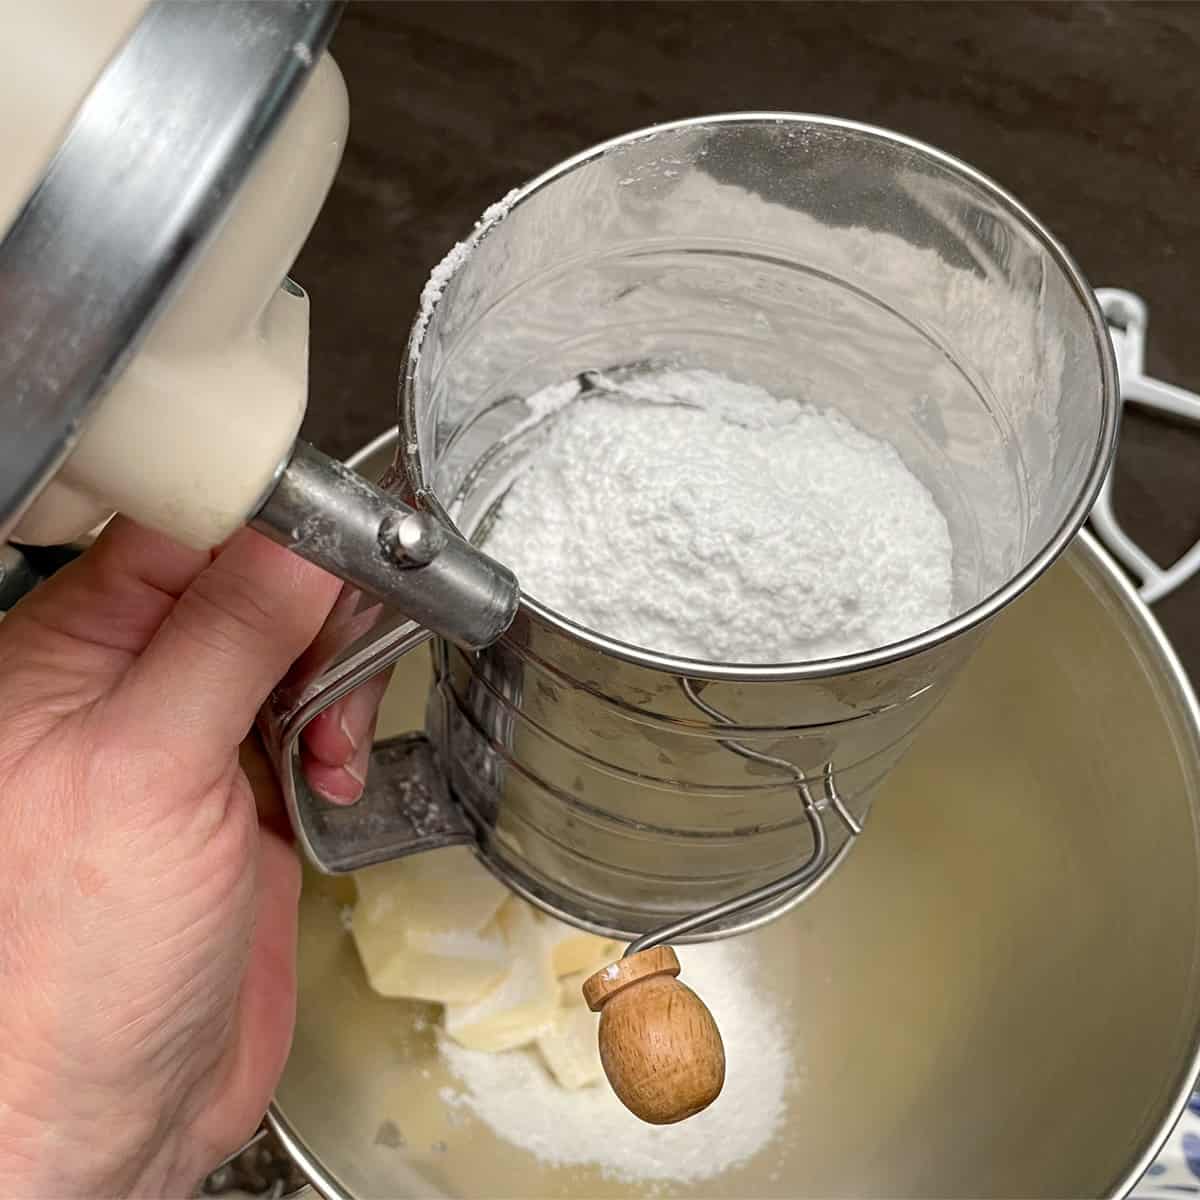 Sifting powdered sugar onto butter cubes in a mixer bowl.